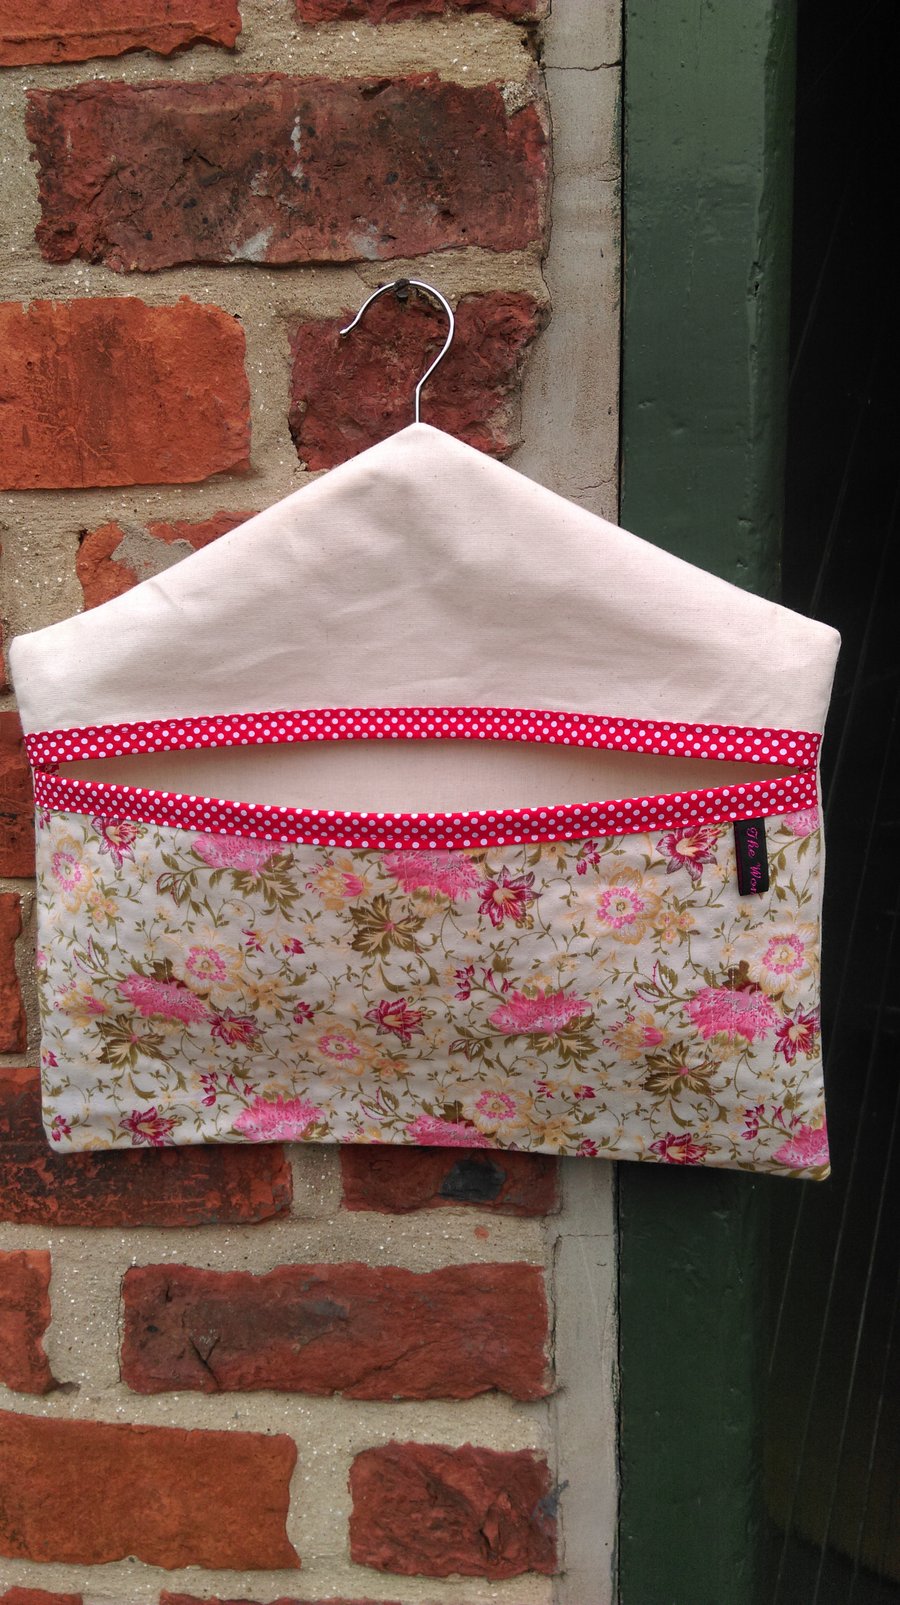 Floral Quilted Multi Use Bag - Pegs, Car Tidy, Nappy Holder etc.